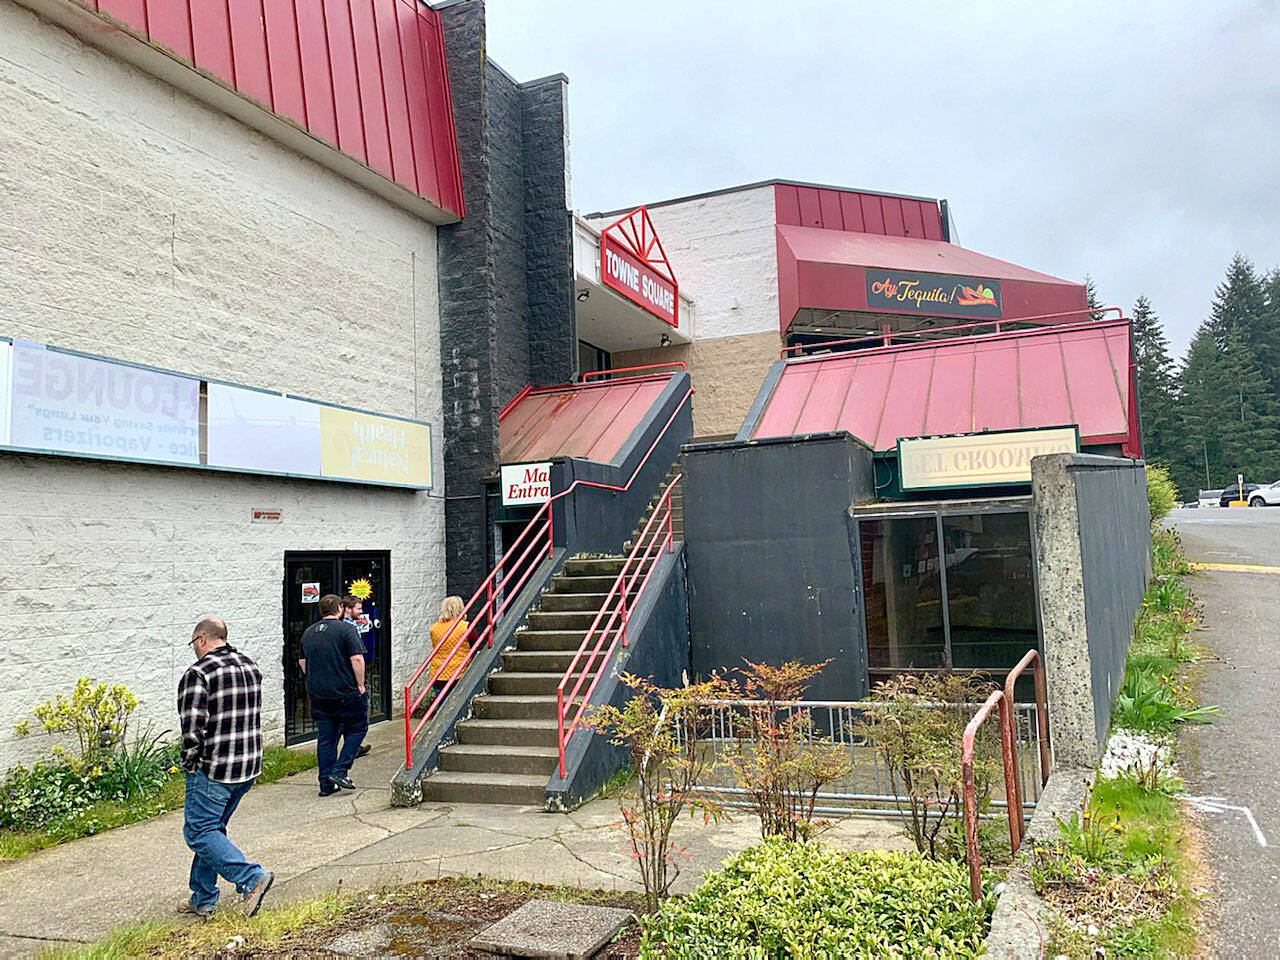 The stairway and exterior wall are to be removed to make way for a grand staircase leading to the mall parking lot. Co-owner Kane Fenner says the stairway is to be completed in “the coming years.” (Bob Smith | Kitsap News Group)